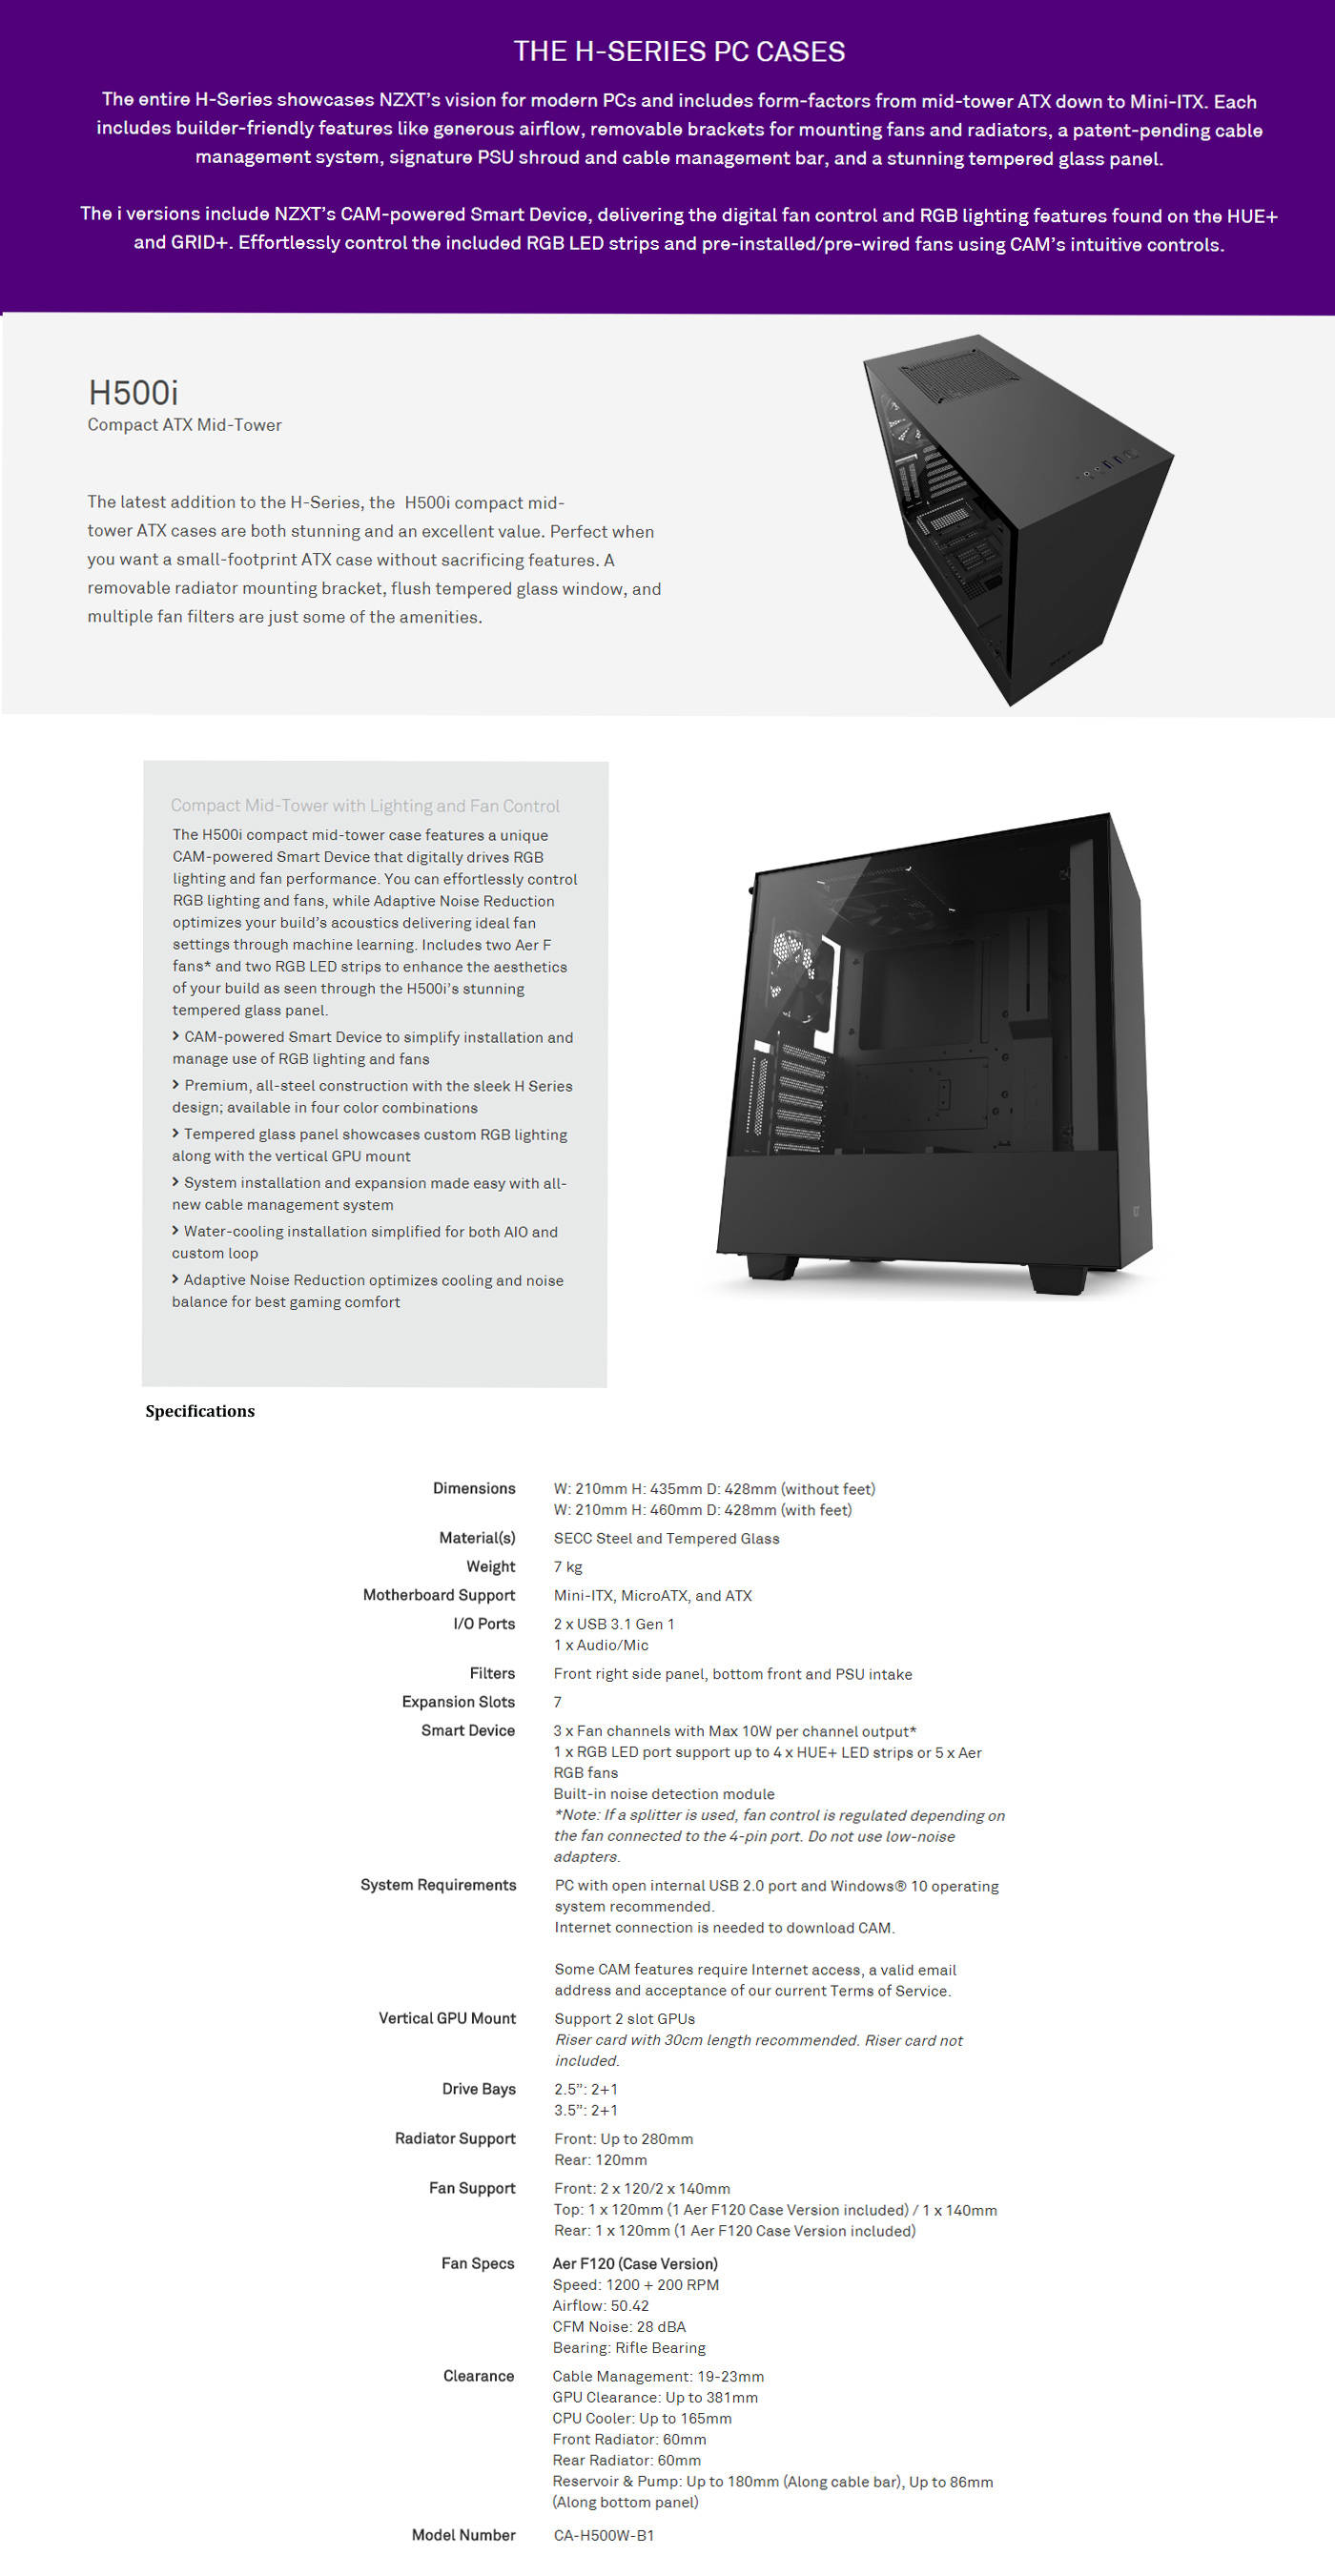  Buy Online Nzxt H500i Compact Mid-Tower with Lighting and Fan Control - (CA-H500W-B1)